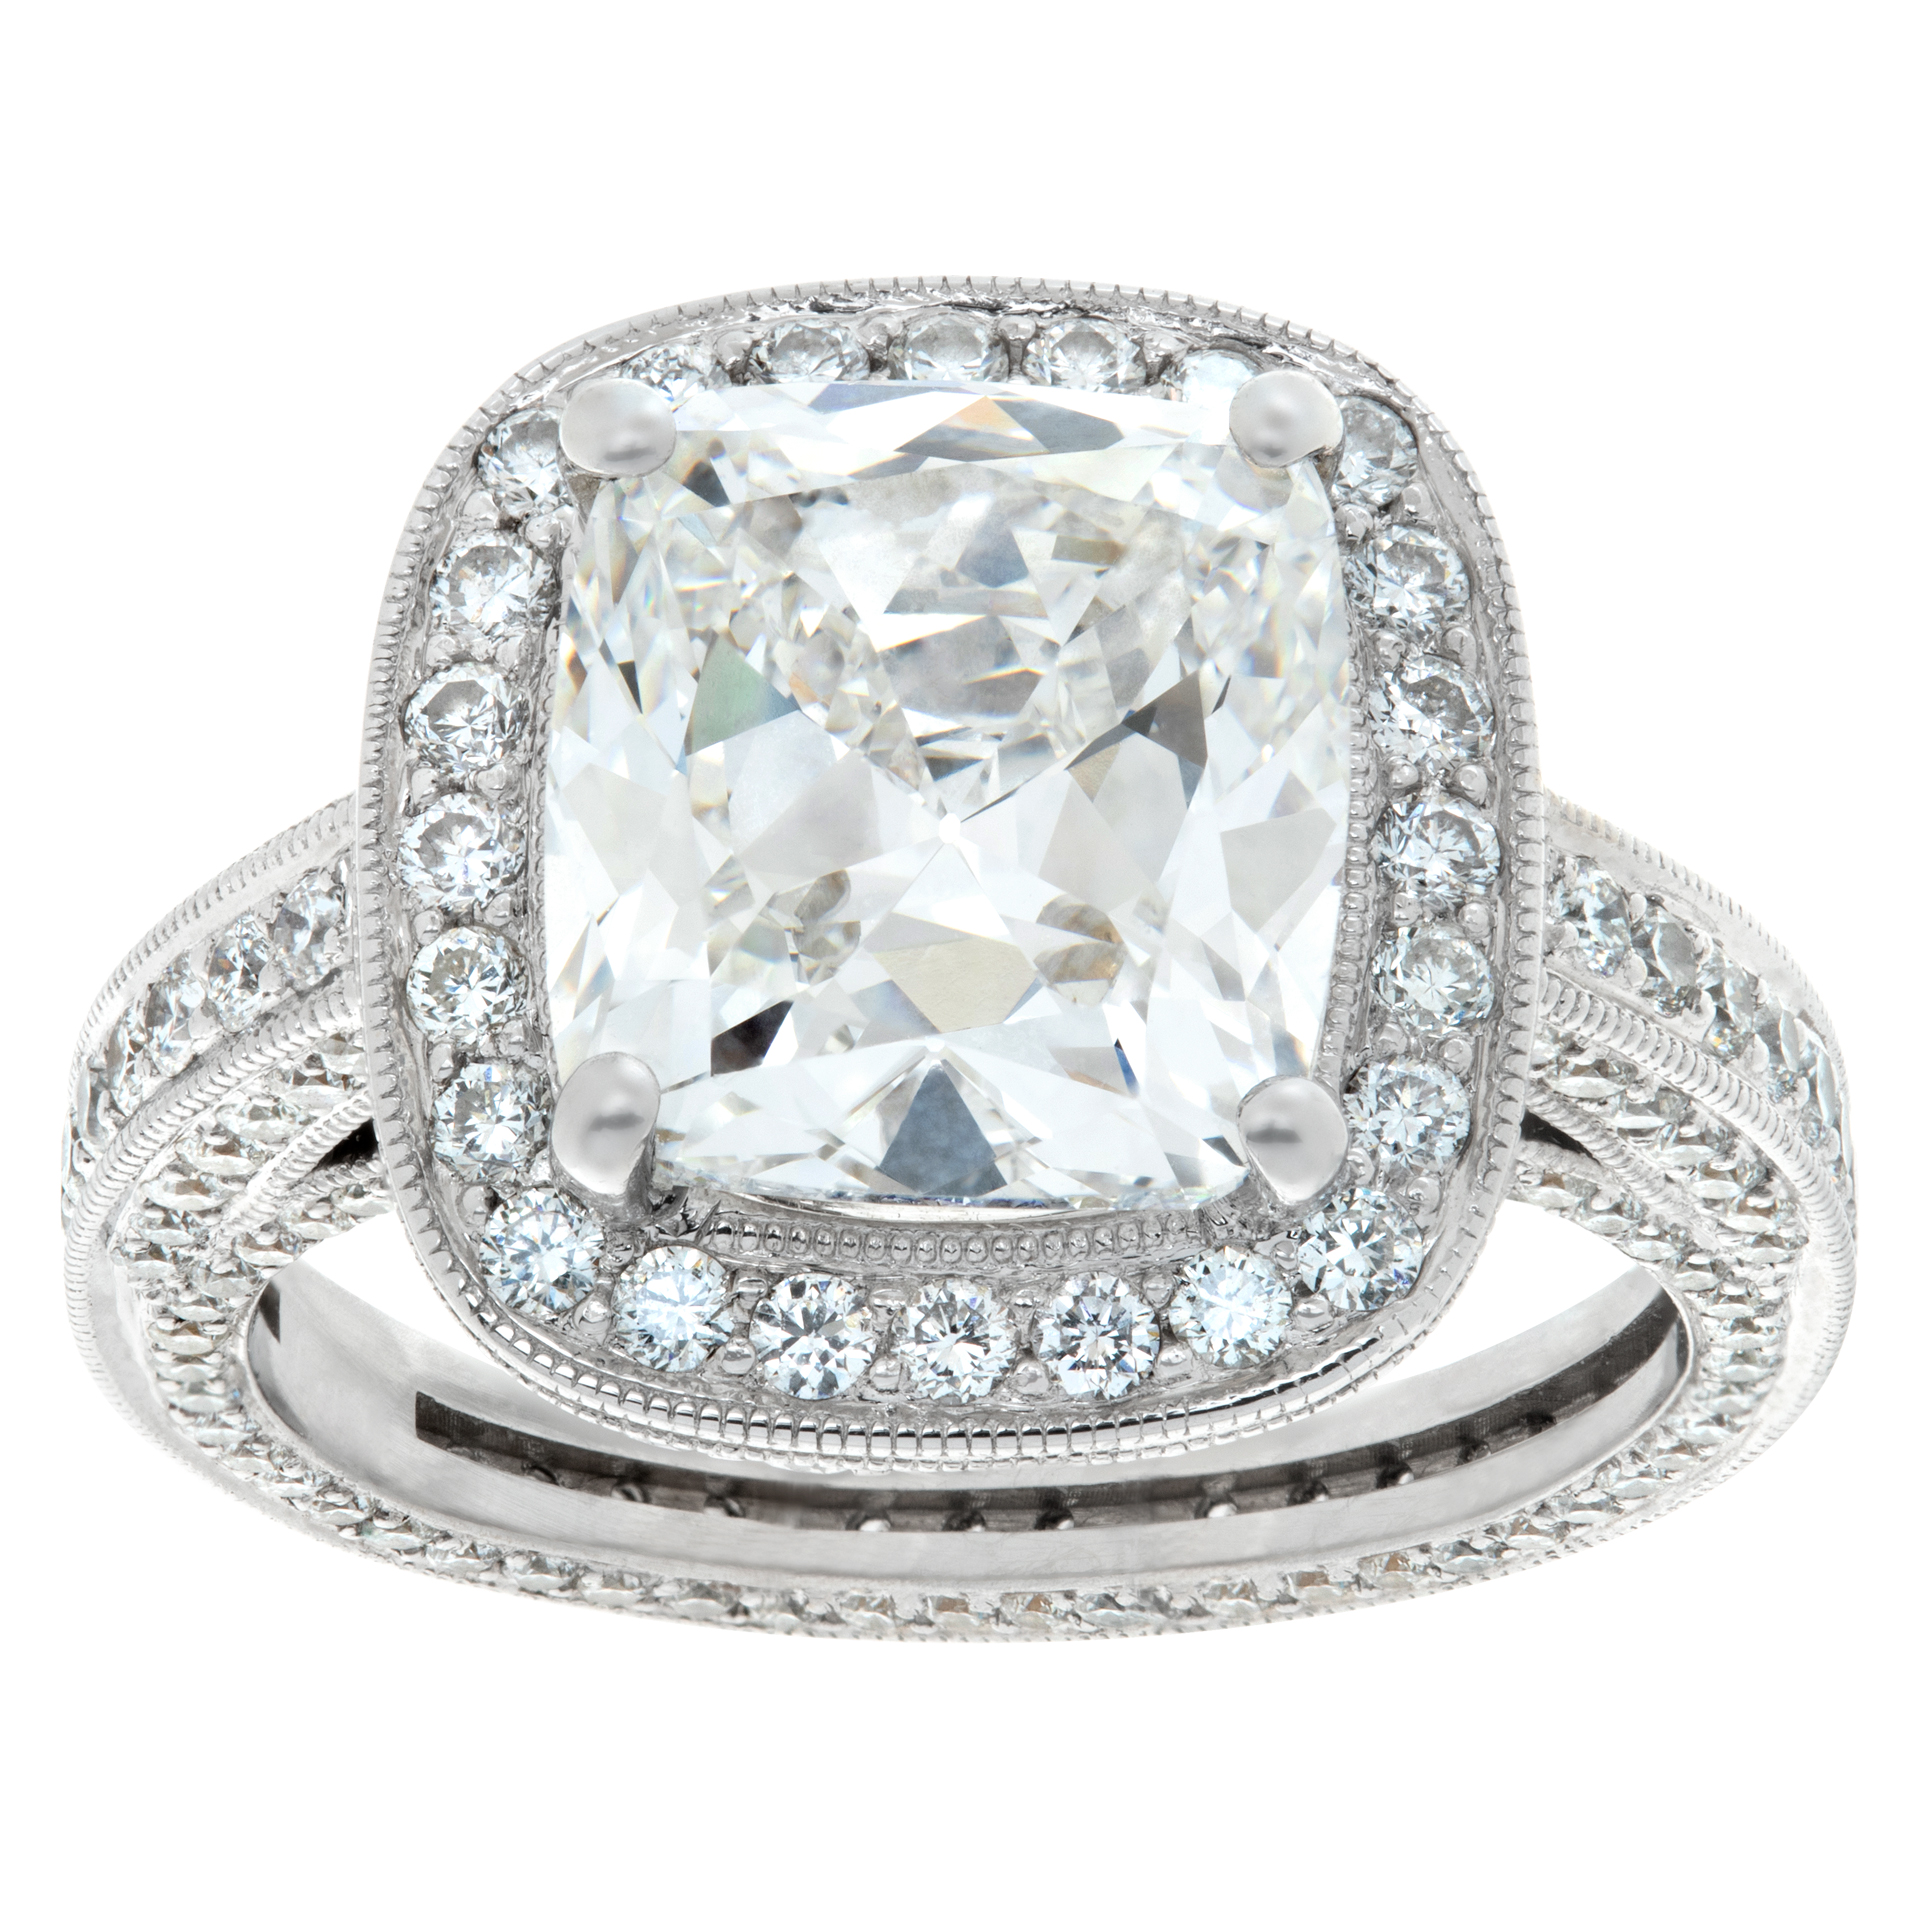 GIA certified cushion modified brilliant cut diamond 5.17 carat ( G color, SI2 clarity) ring (Stones)